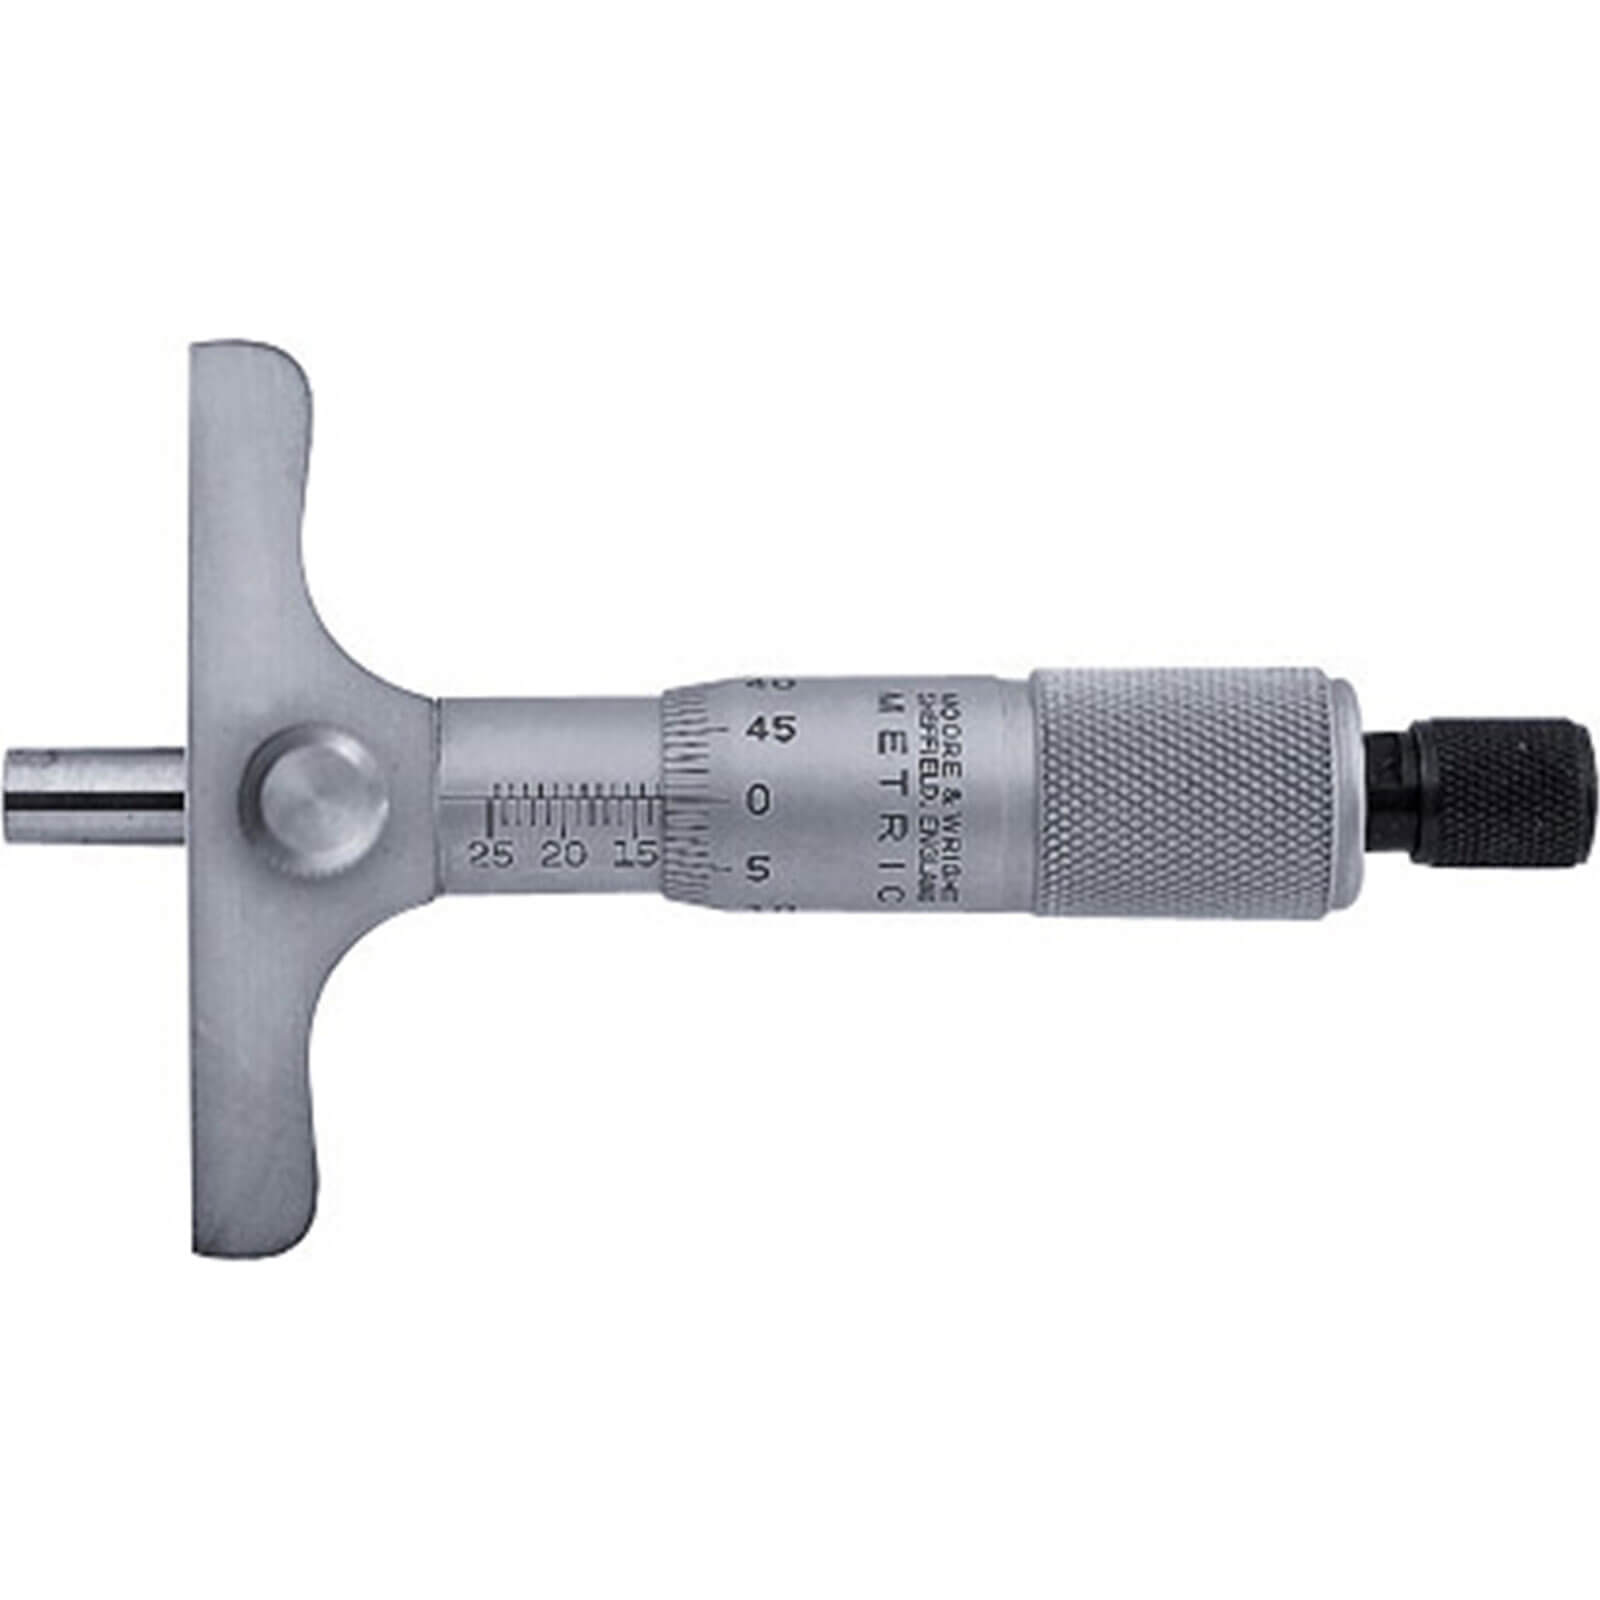 Moore and Wright 891M Adjustable Depth Micrometer 0mm - 25mm